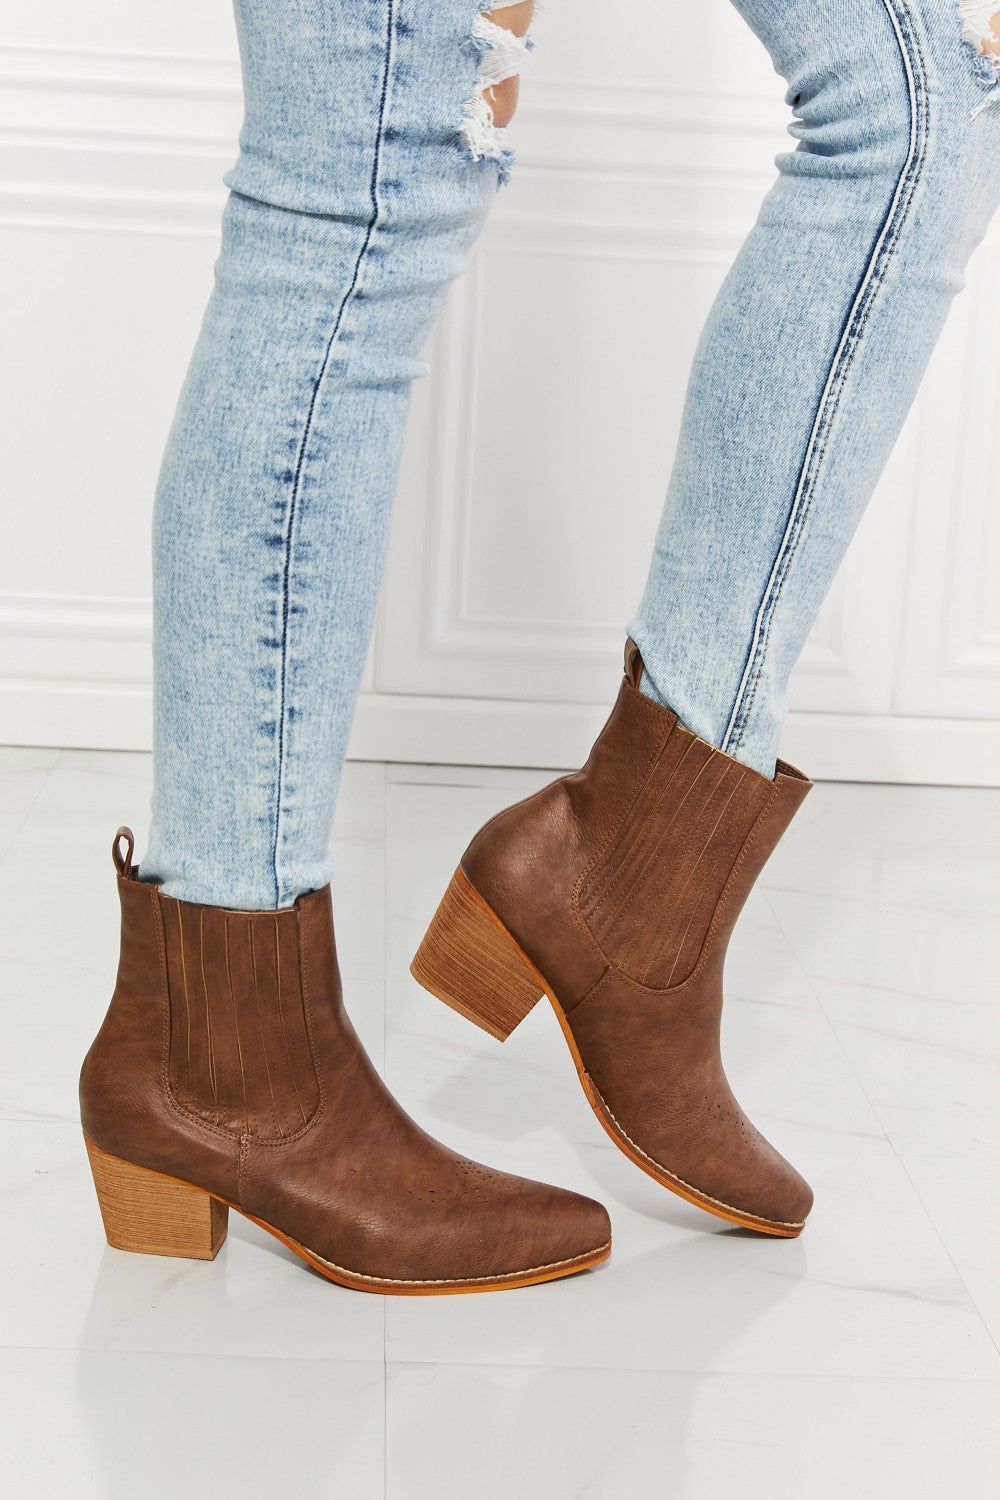 MMShoes Love the Journey Stacked Heel Chelsea Boot in Chestnut Ti Amo I love you